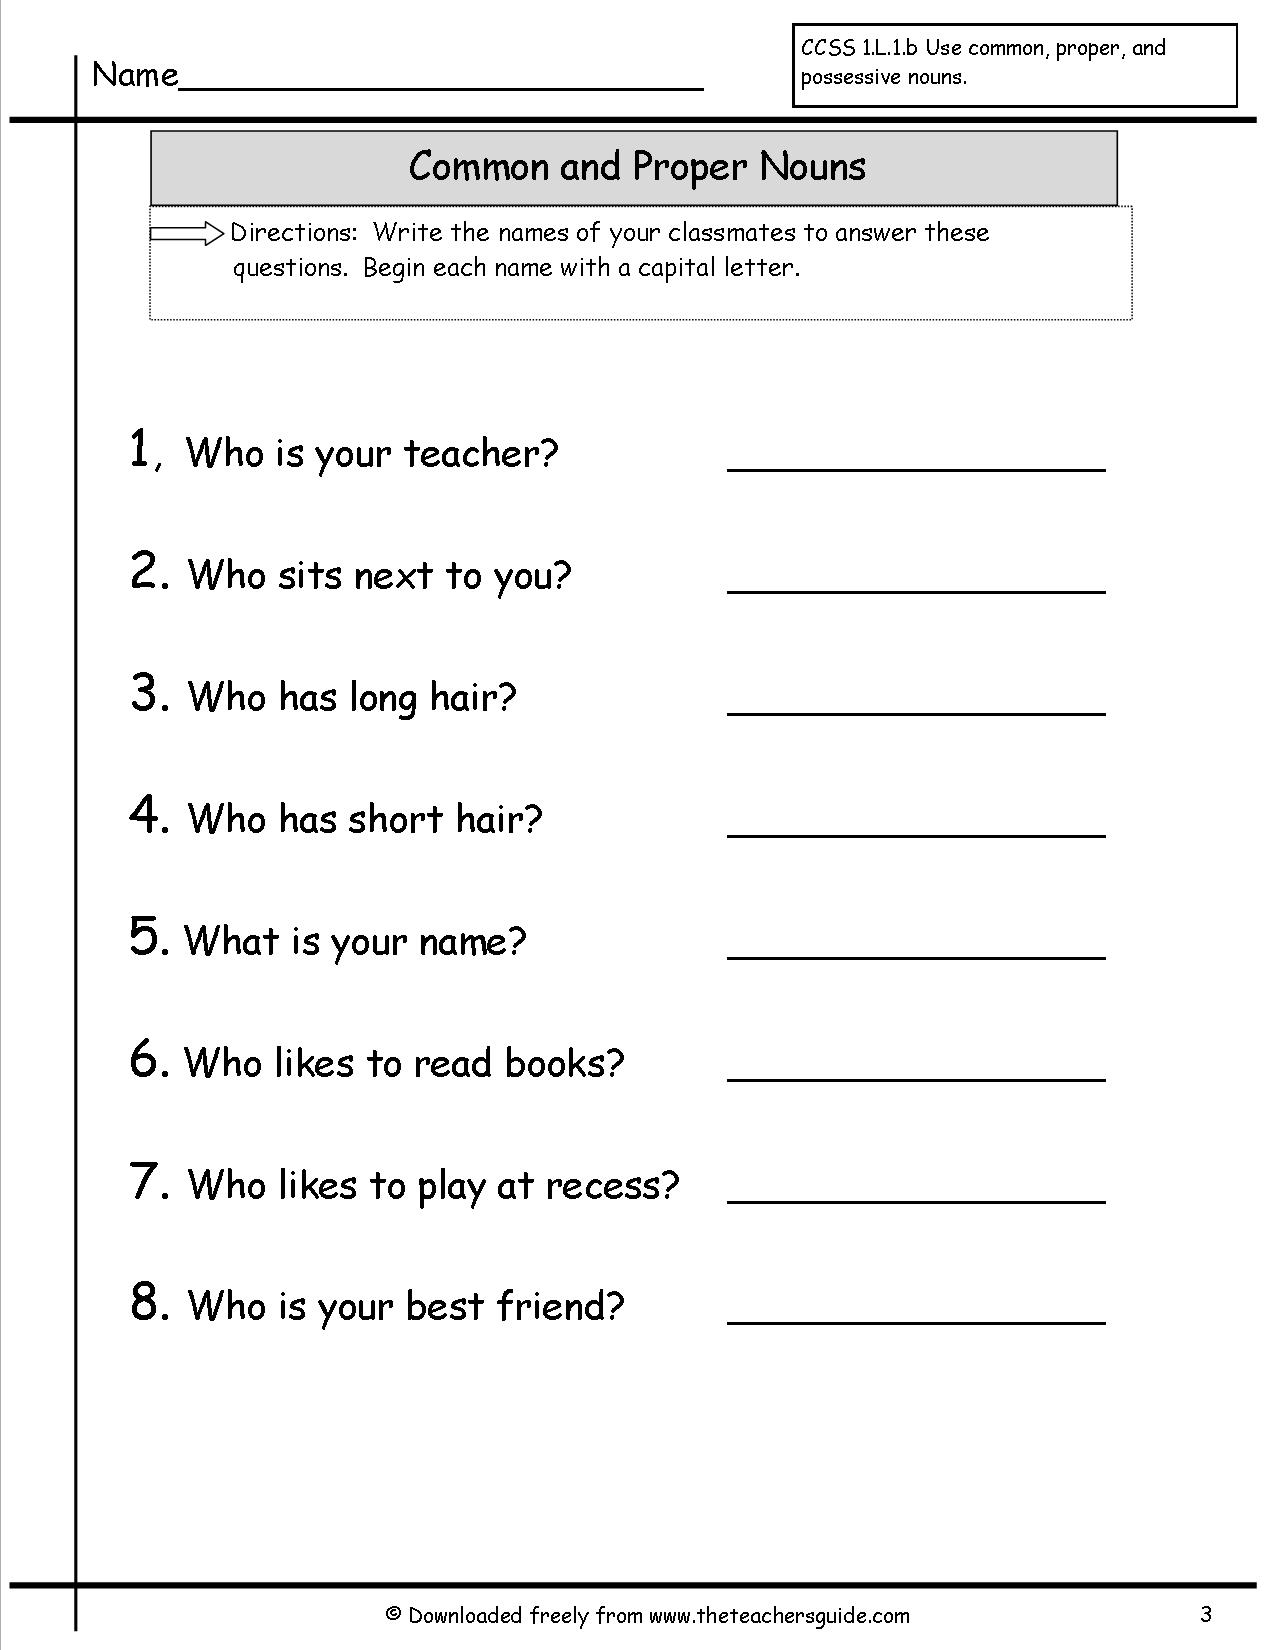 Common And Proper Noun Worksheet For Class 3 Pin On First Grade